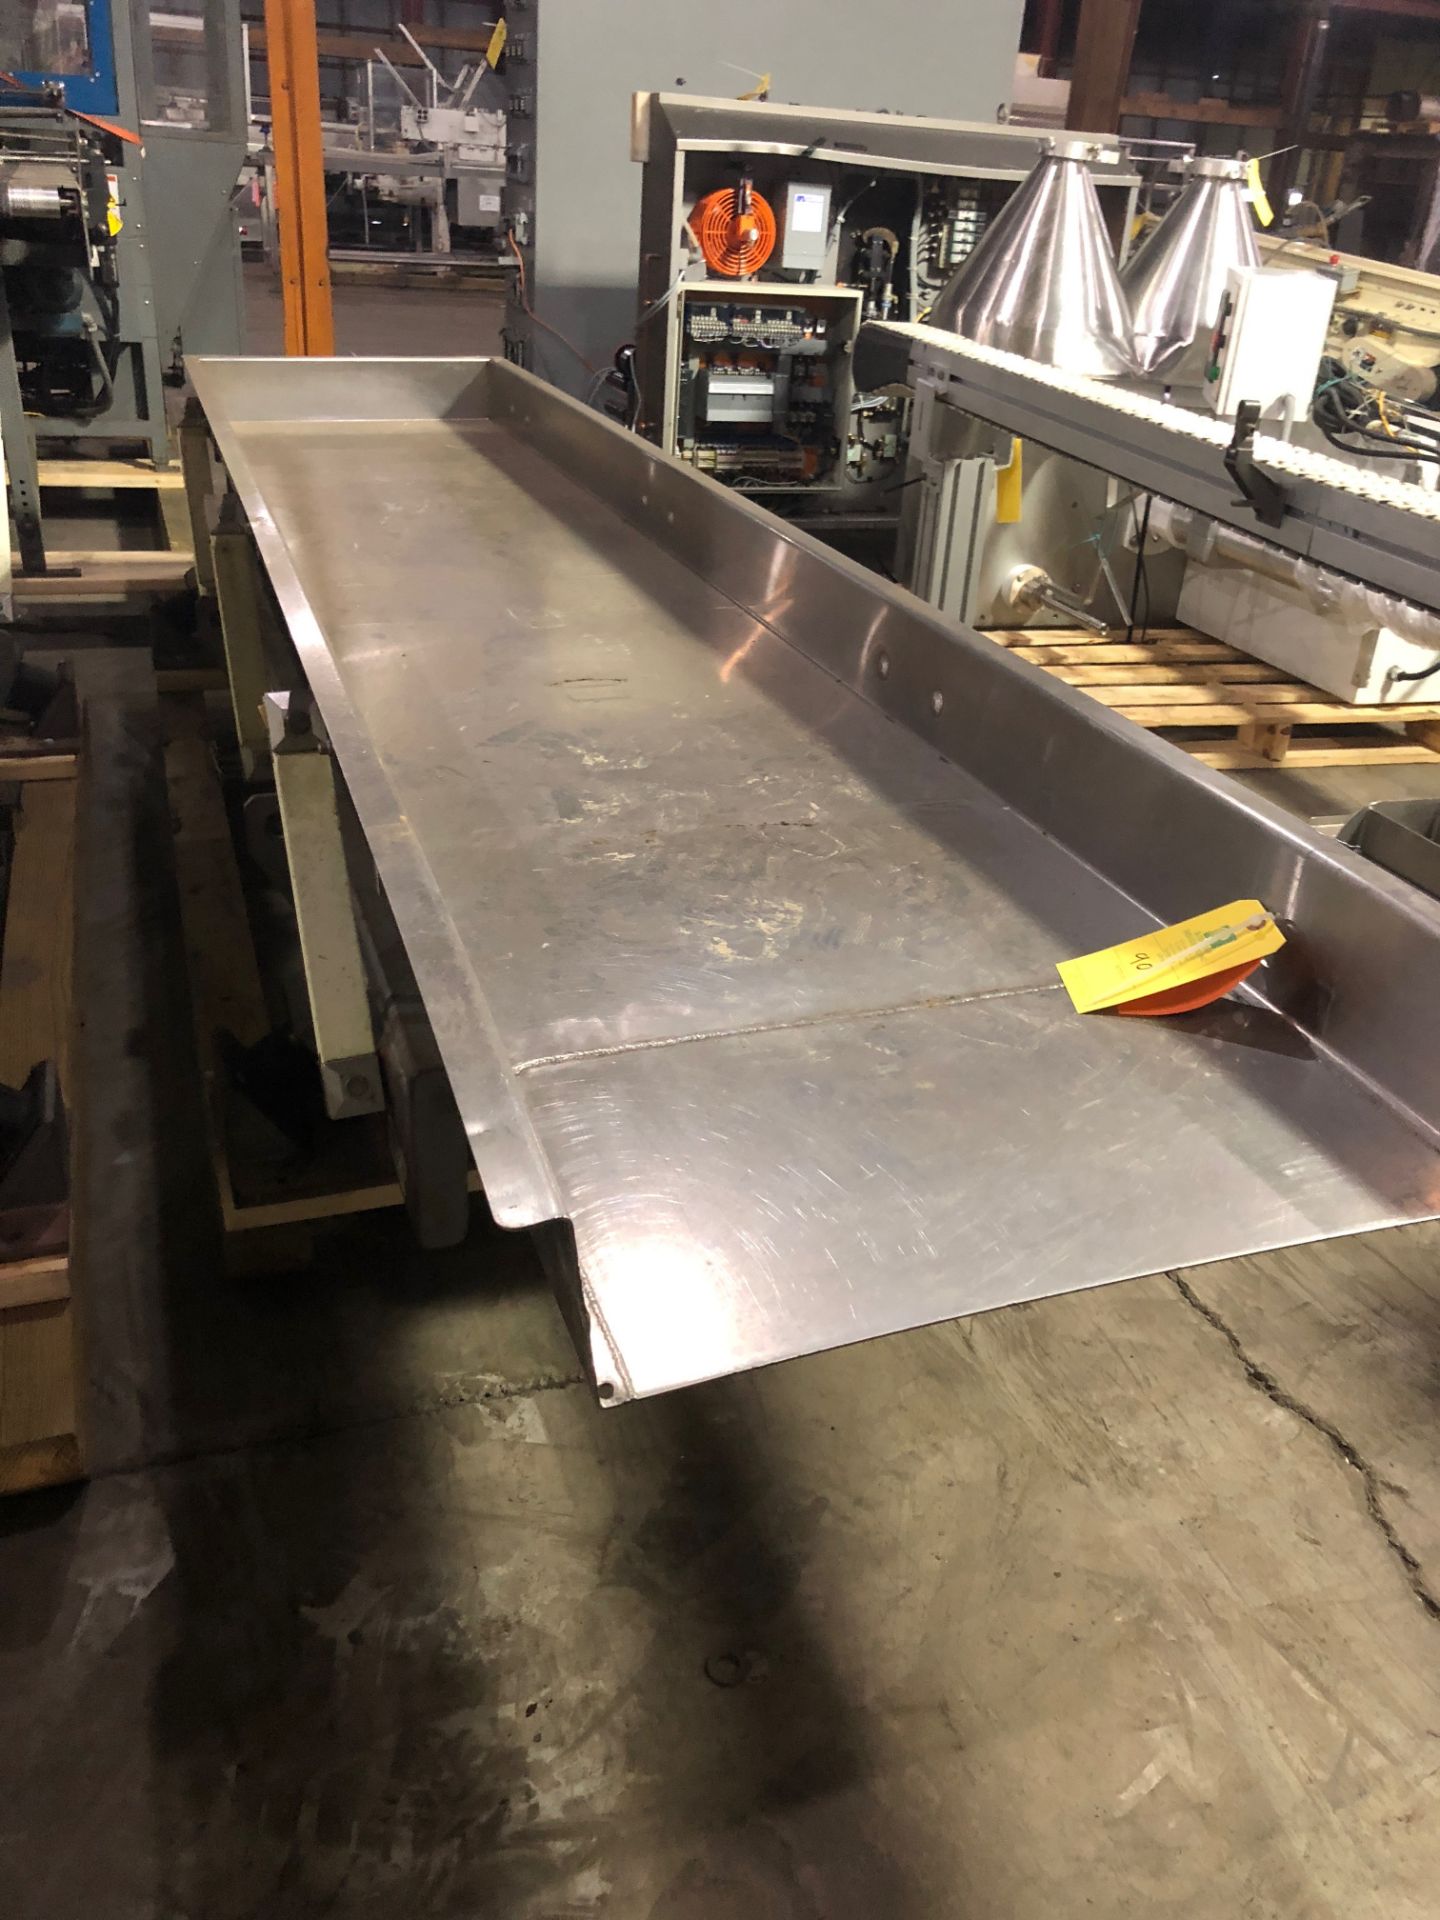 FMC Vibratory Feeder Conveyor, 6 in. deep x 10 ft. l x 32 ft. w Rigging Fee for the item: $30 - Image 2 of 2